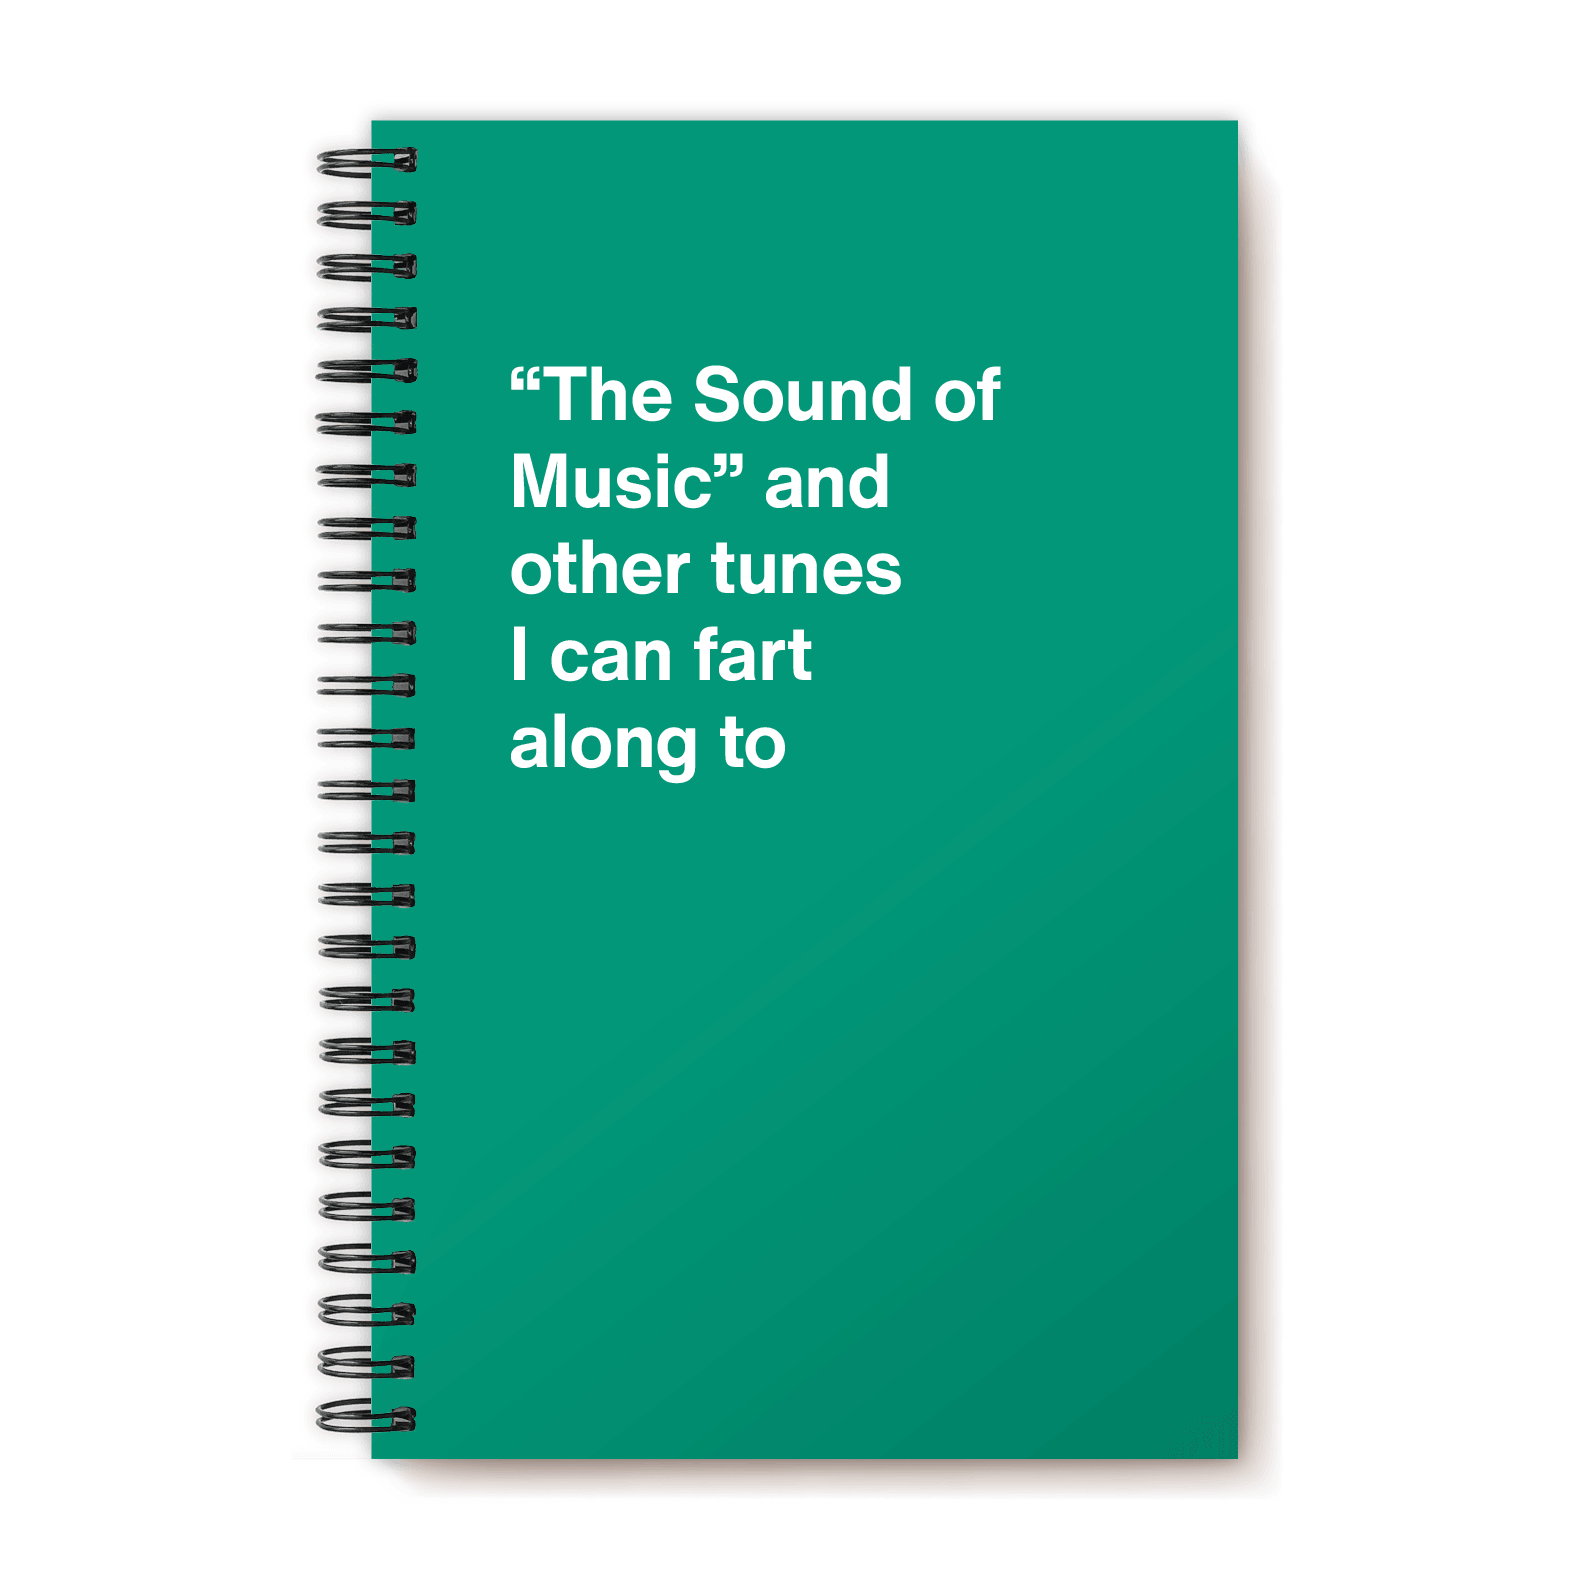 “The Sound of Music” and other tunes I can fart along to | WTF Notebooks